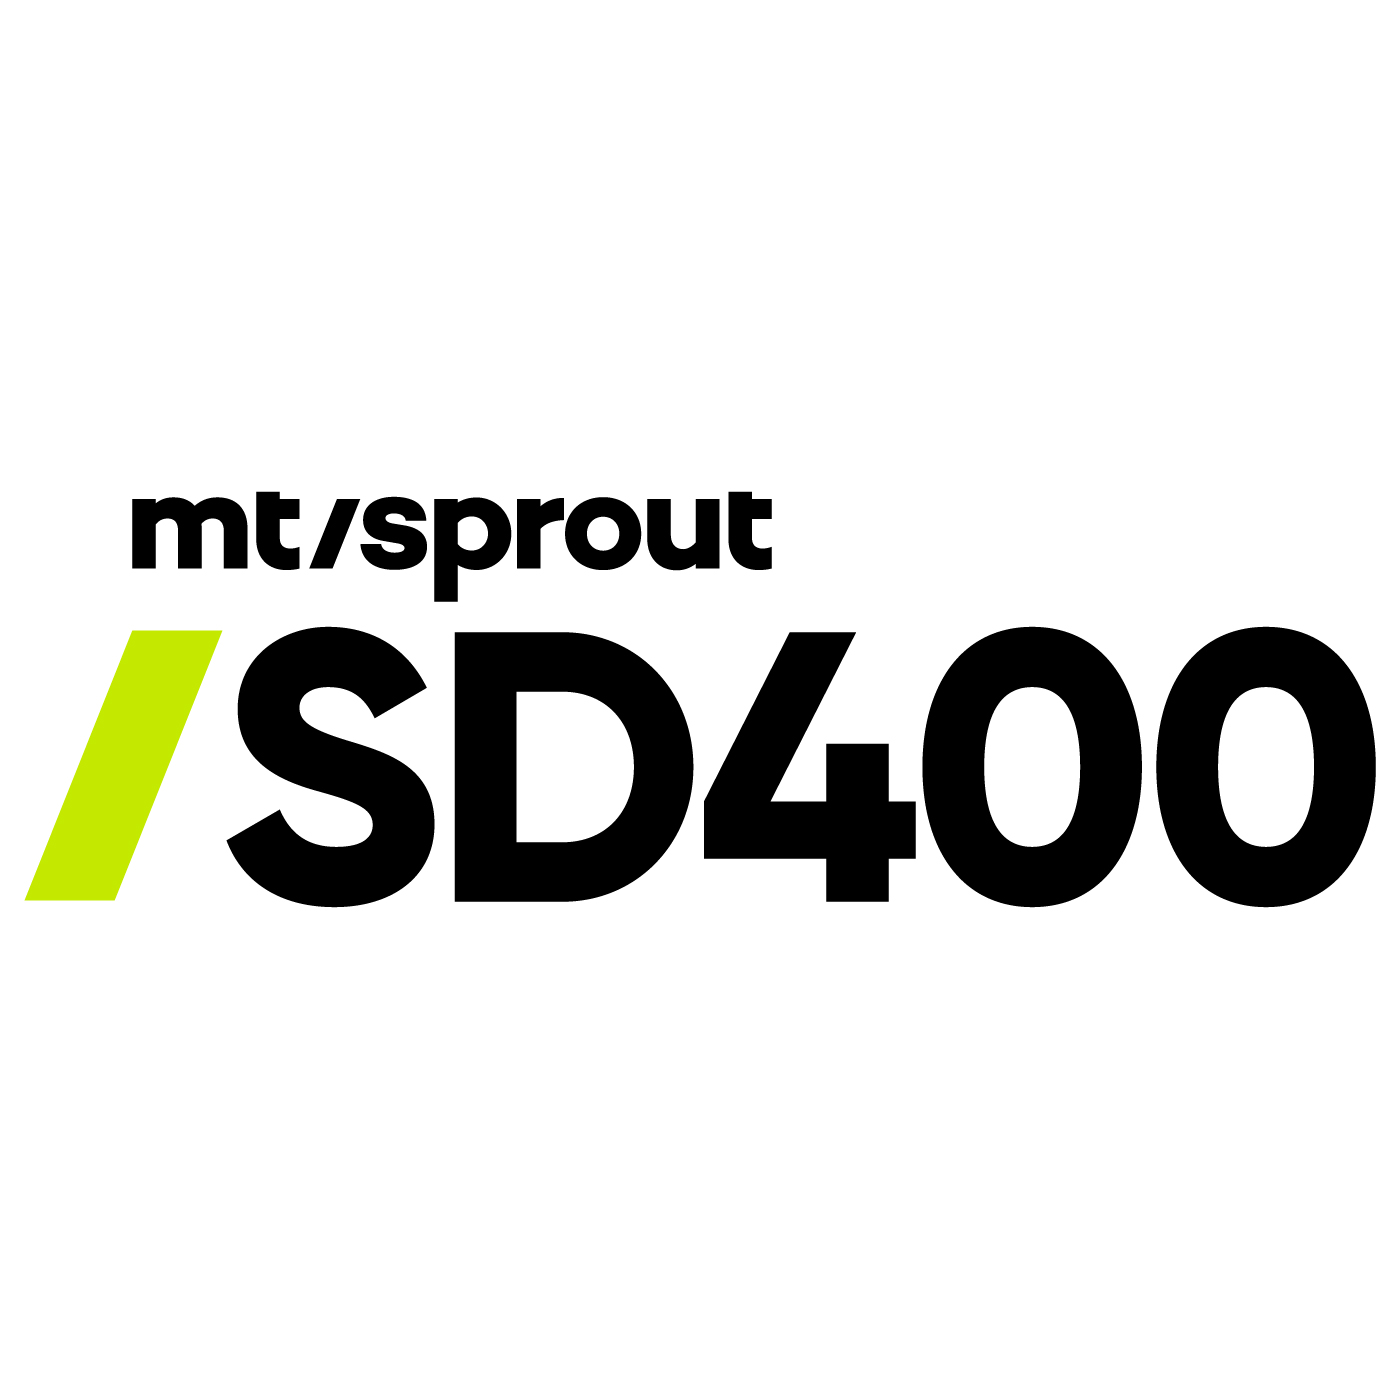 MT-sprout-SD400 | Awards and certificates | Milgro